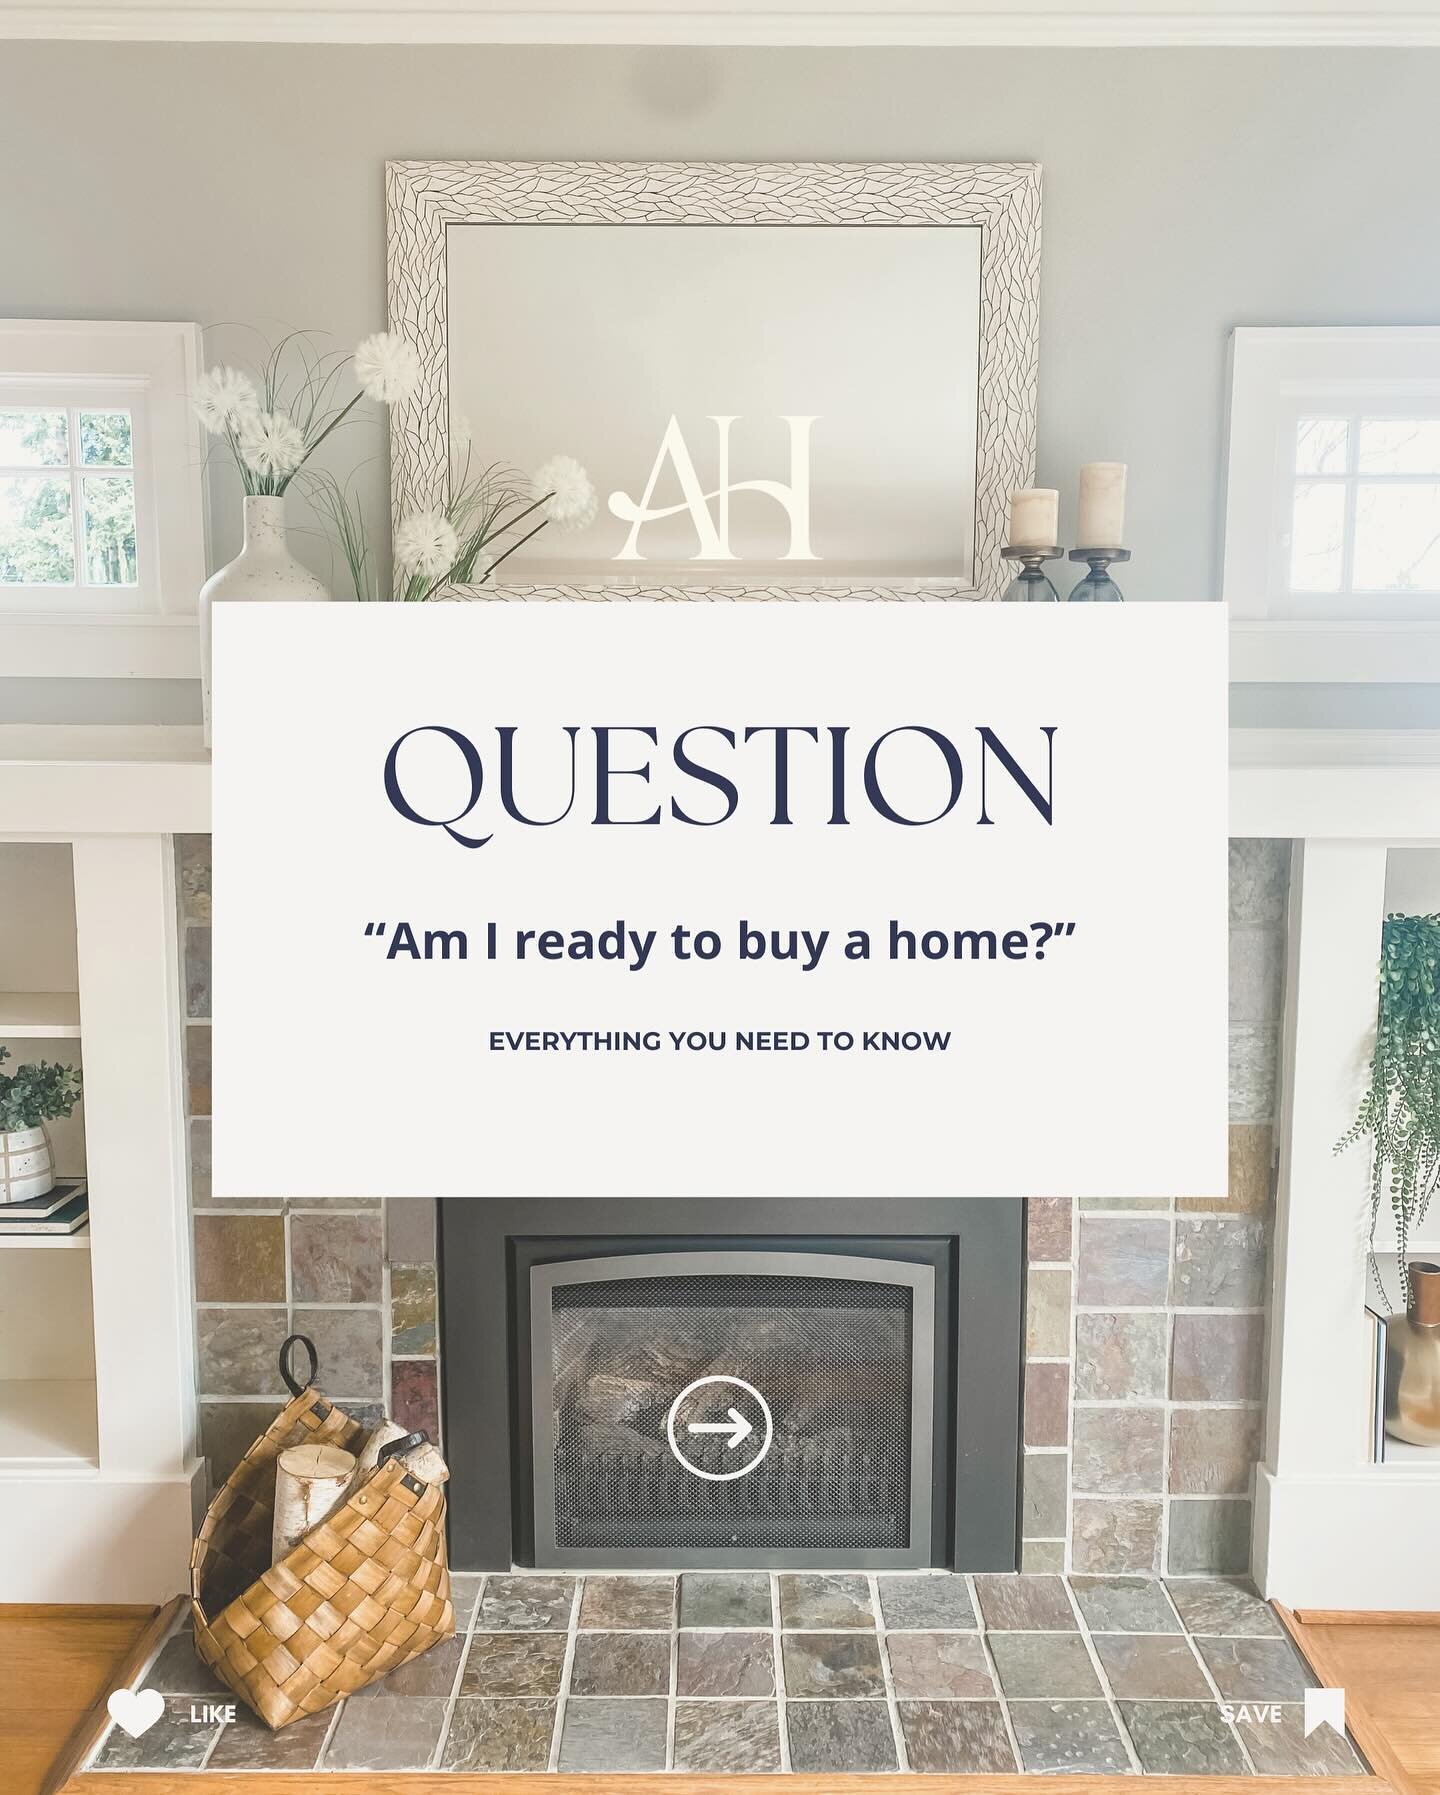 Are you ready to buy a home?!

It&rsquo;s a question I hear often and the usual sentiment is one of doubt and uncertainty. One of the biggest surprises for most though is that they can buy a home! 

If you find yourself in a transition with your livi